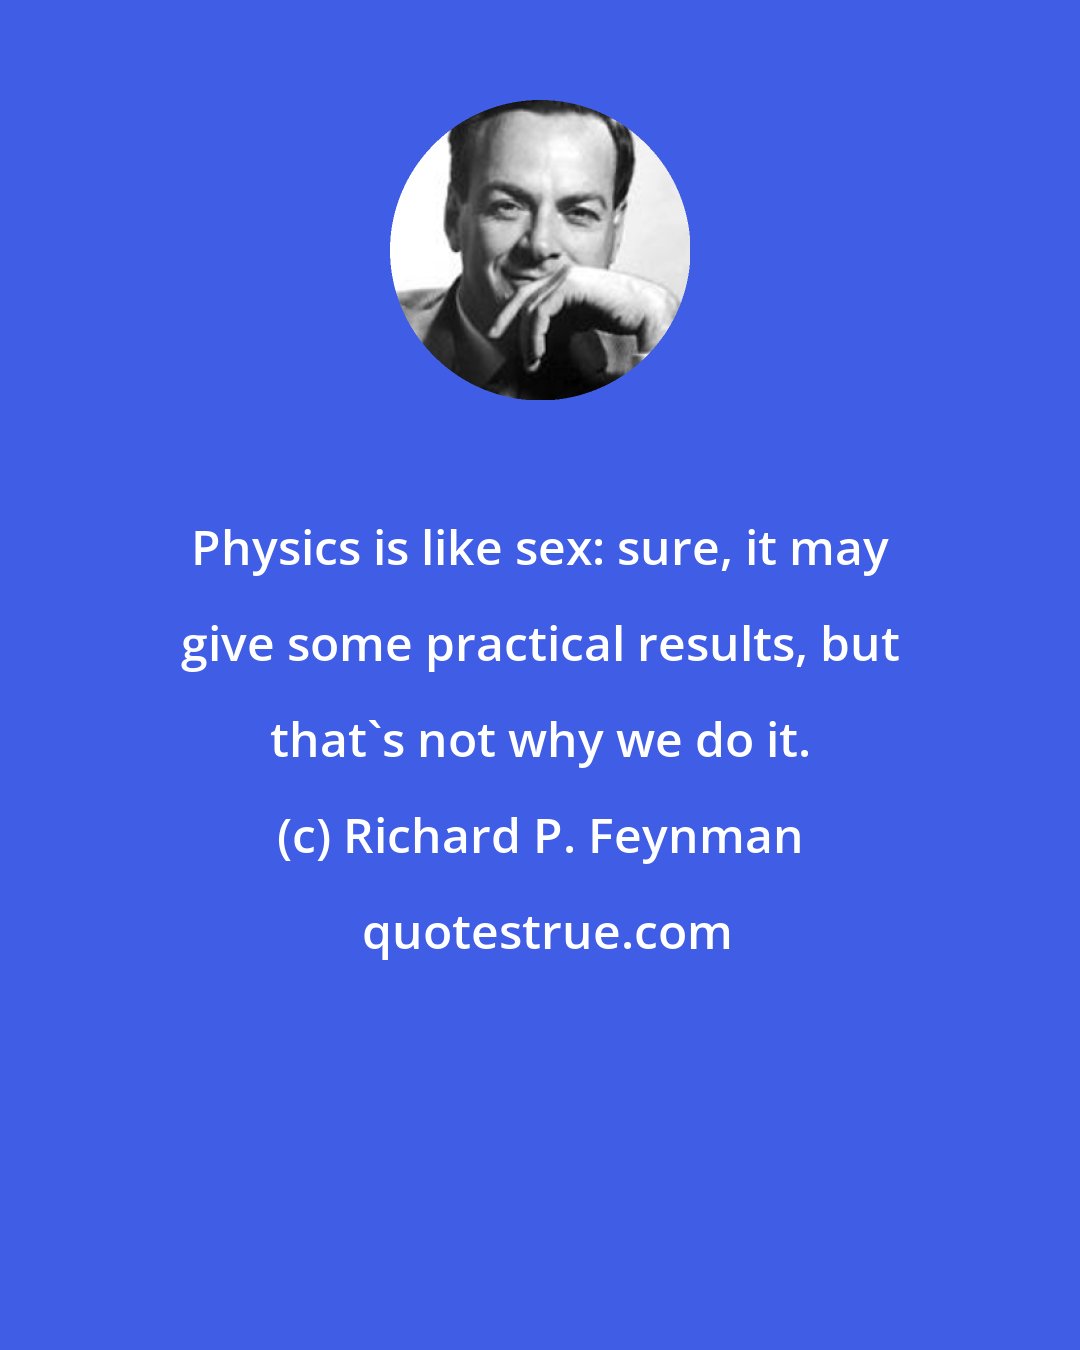 Richard P. Feynman: Physics is like sex: sure, it may give some practical results, but that's not why we do it.